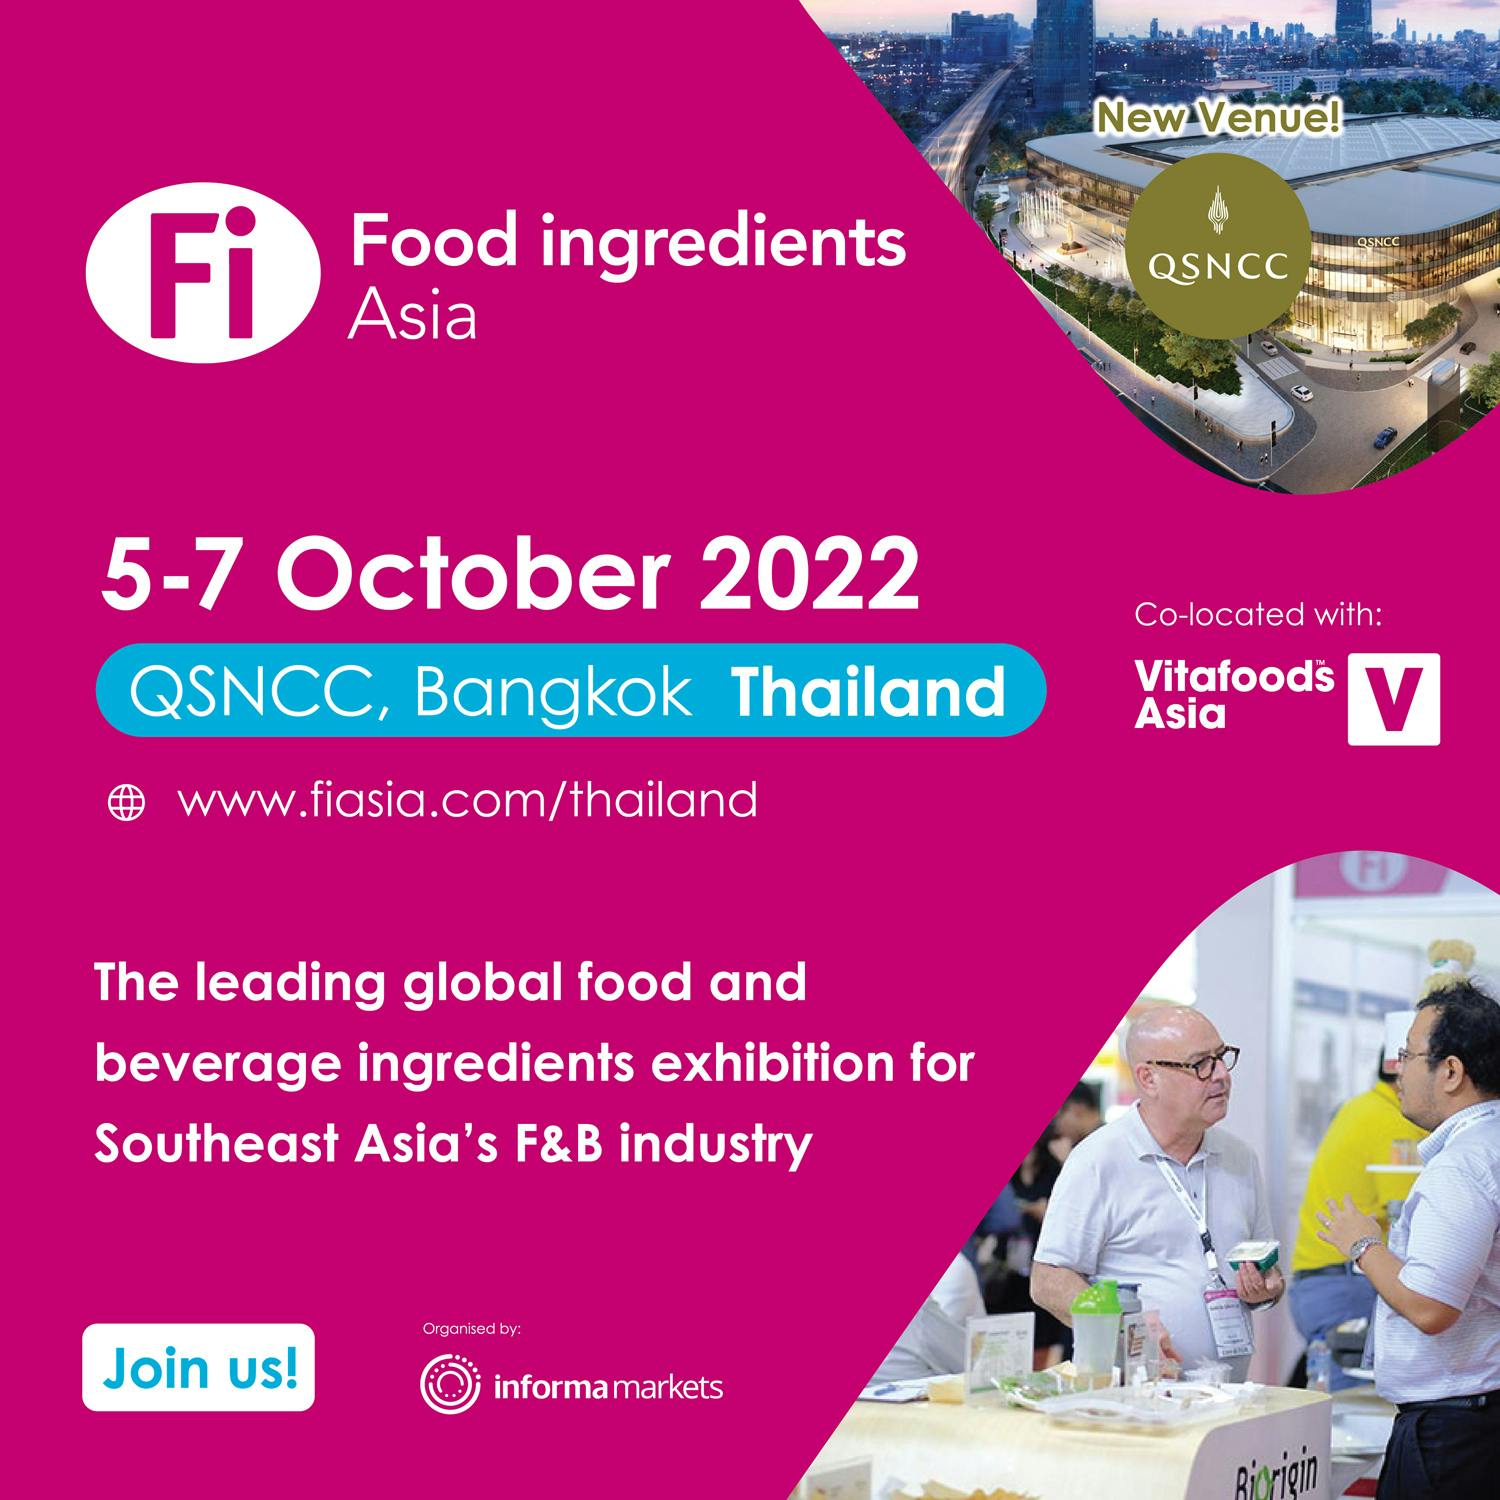 QSNCC | Fi Asia co-located with Vitafoods Asia